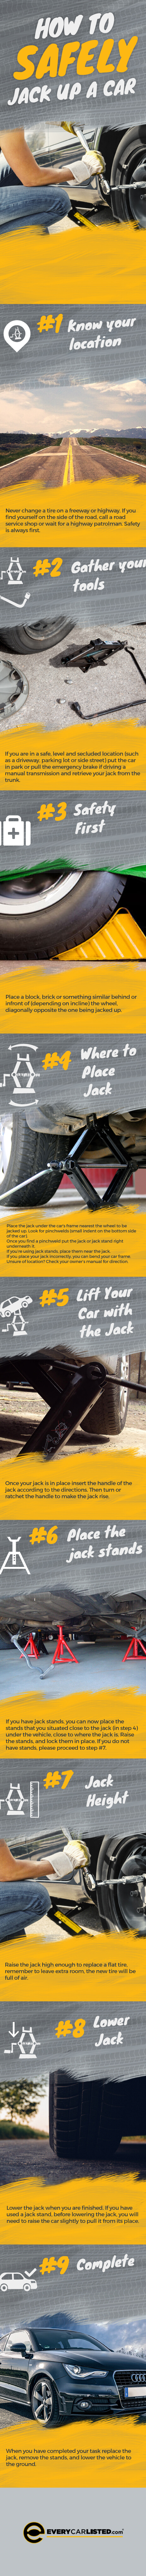 safely-jack-up-a-car-infographic